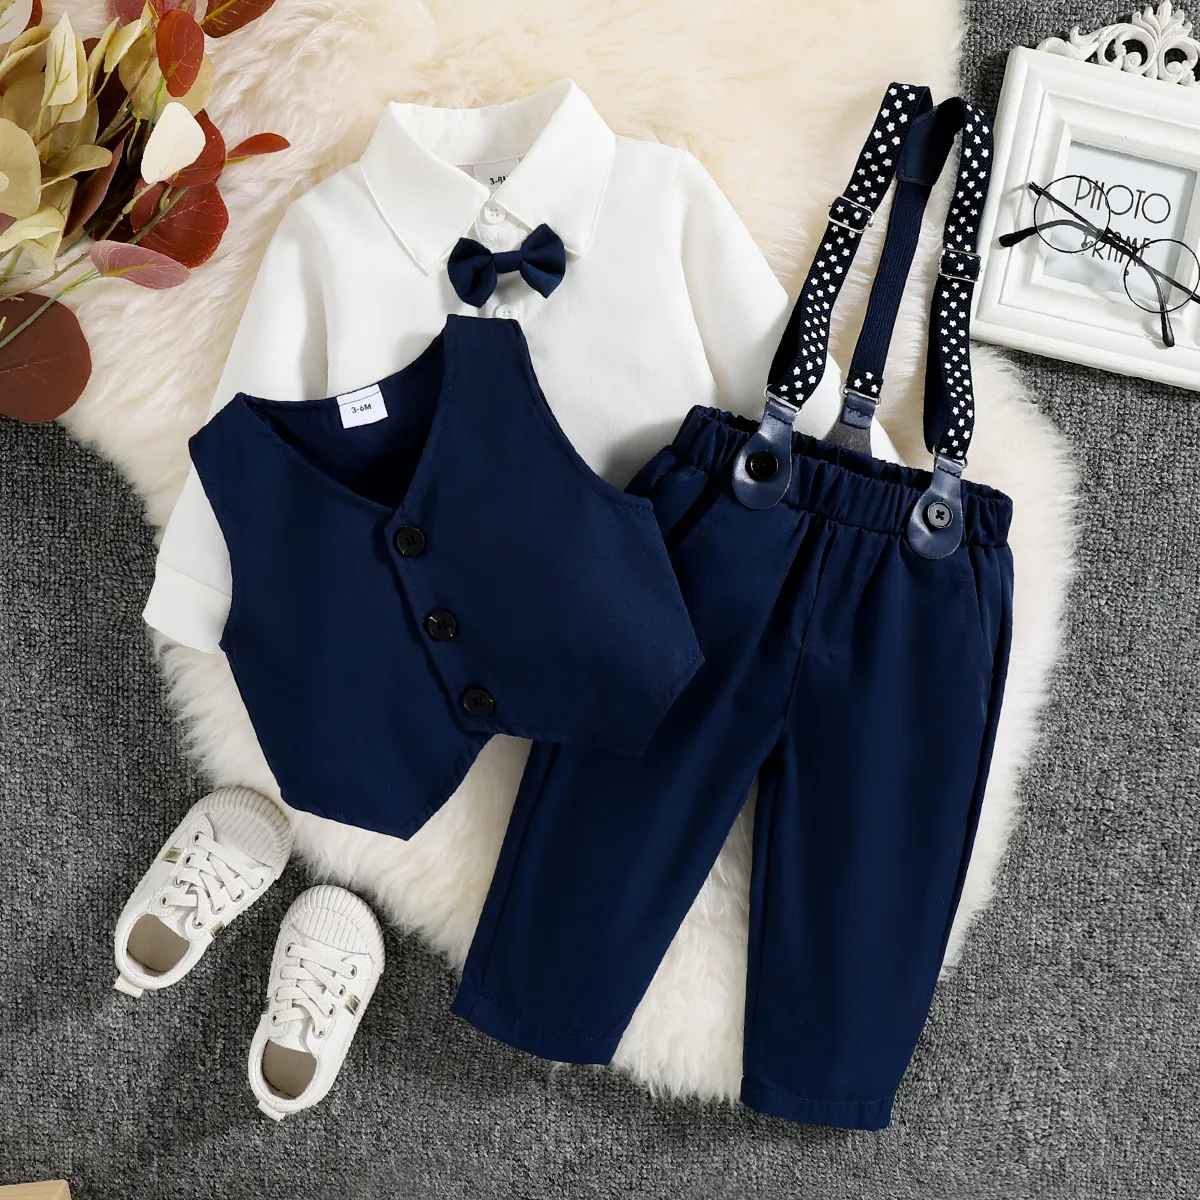 Baby Boys Clothes Set, Dress Shirt with Bowtie + Suspender Pants, 12Months  - 7 Years - Walmart.com